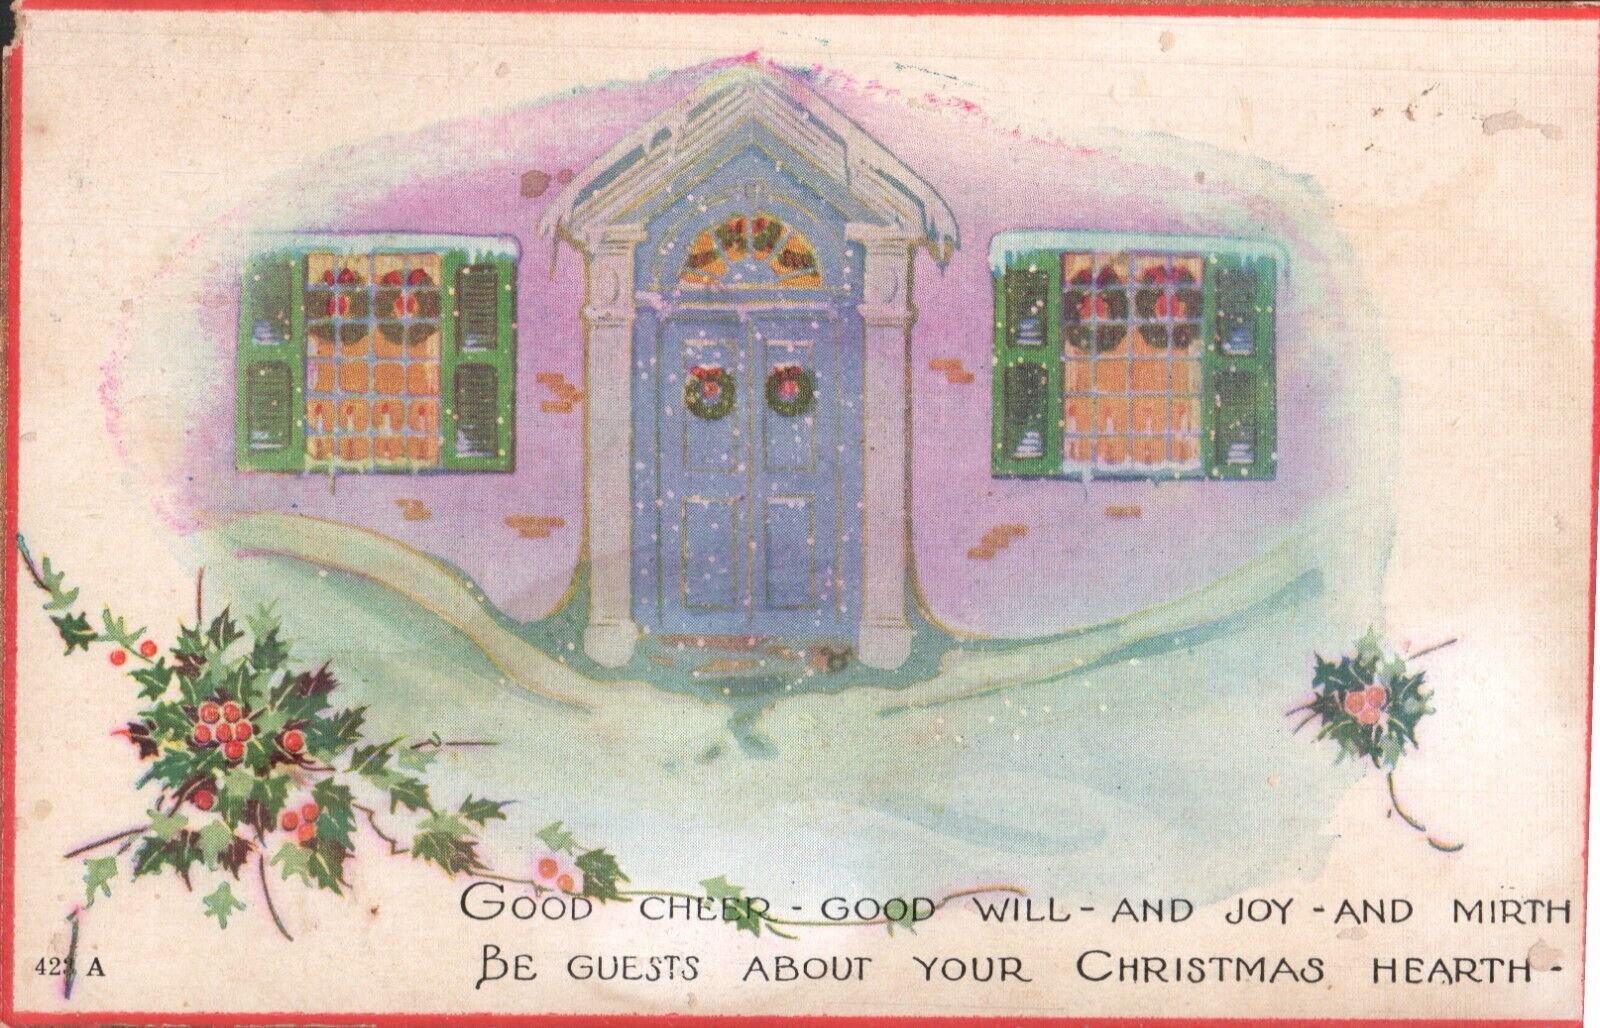 Posted Postcard 1928 Made in USA Christmas Hearth of Cottage Vintage # 423 A